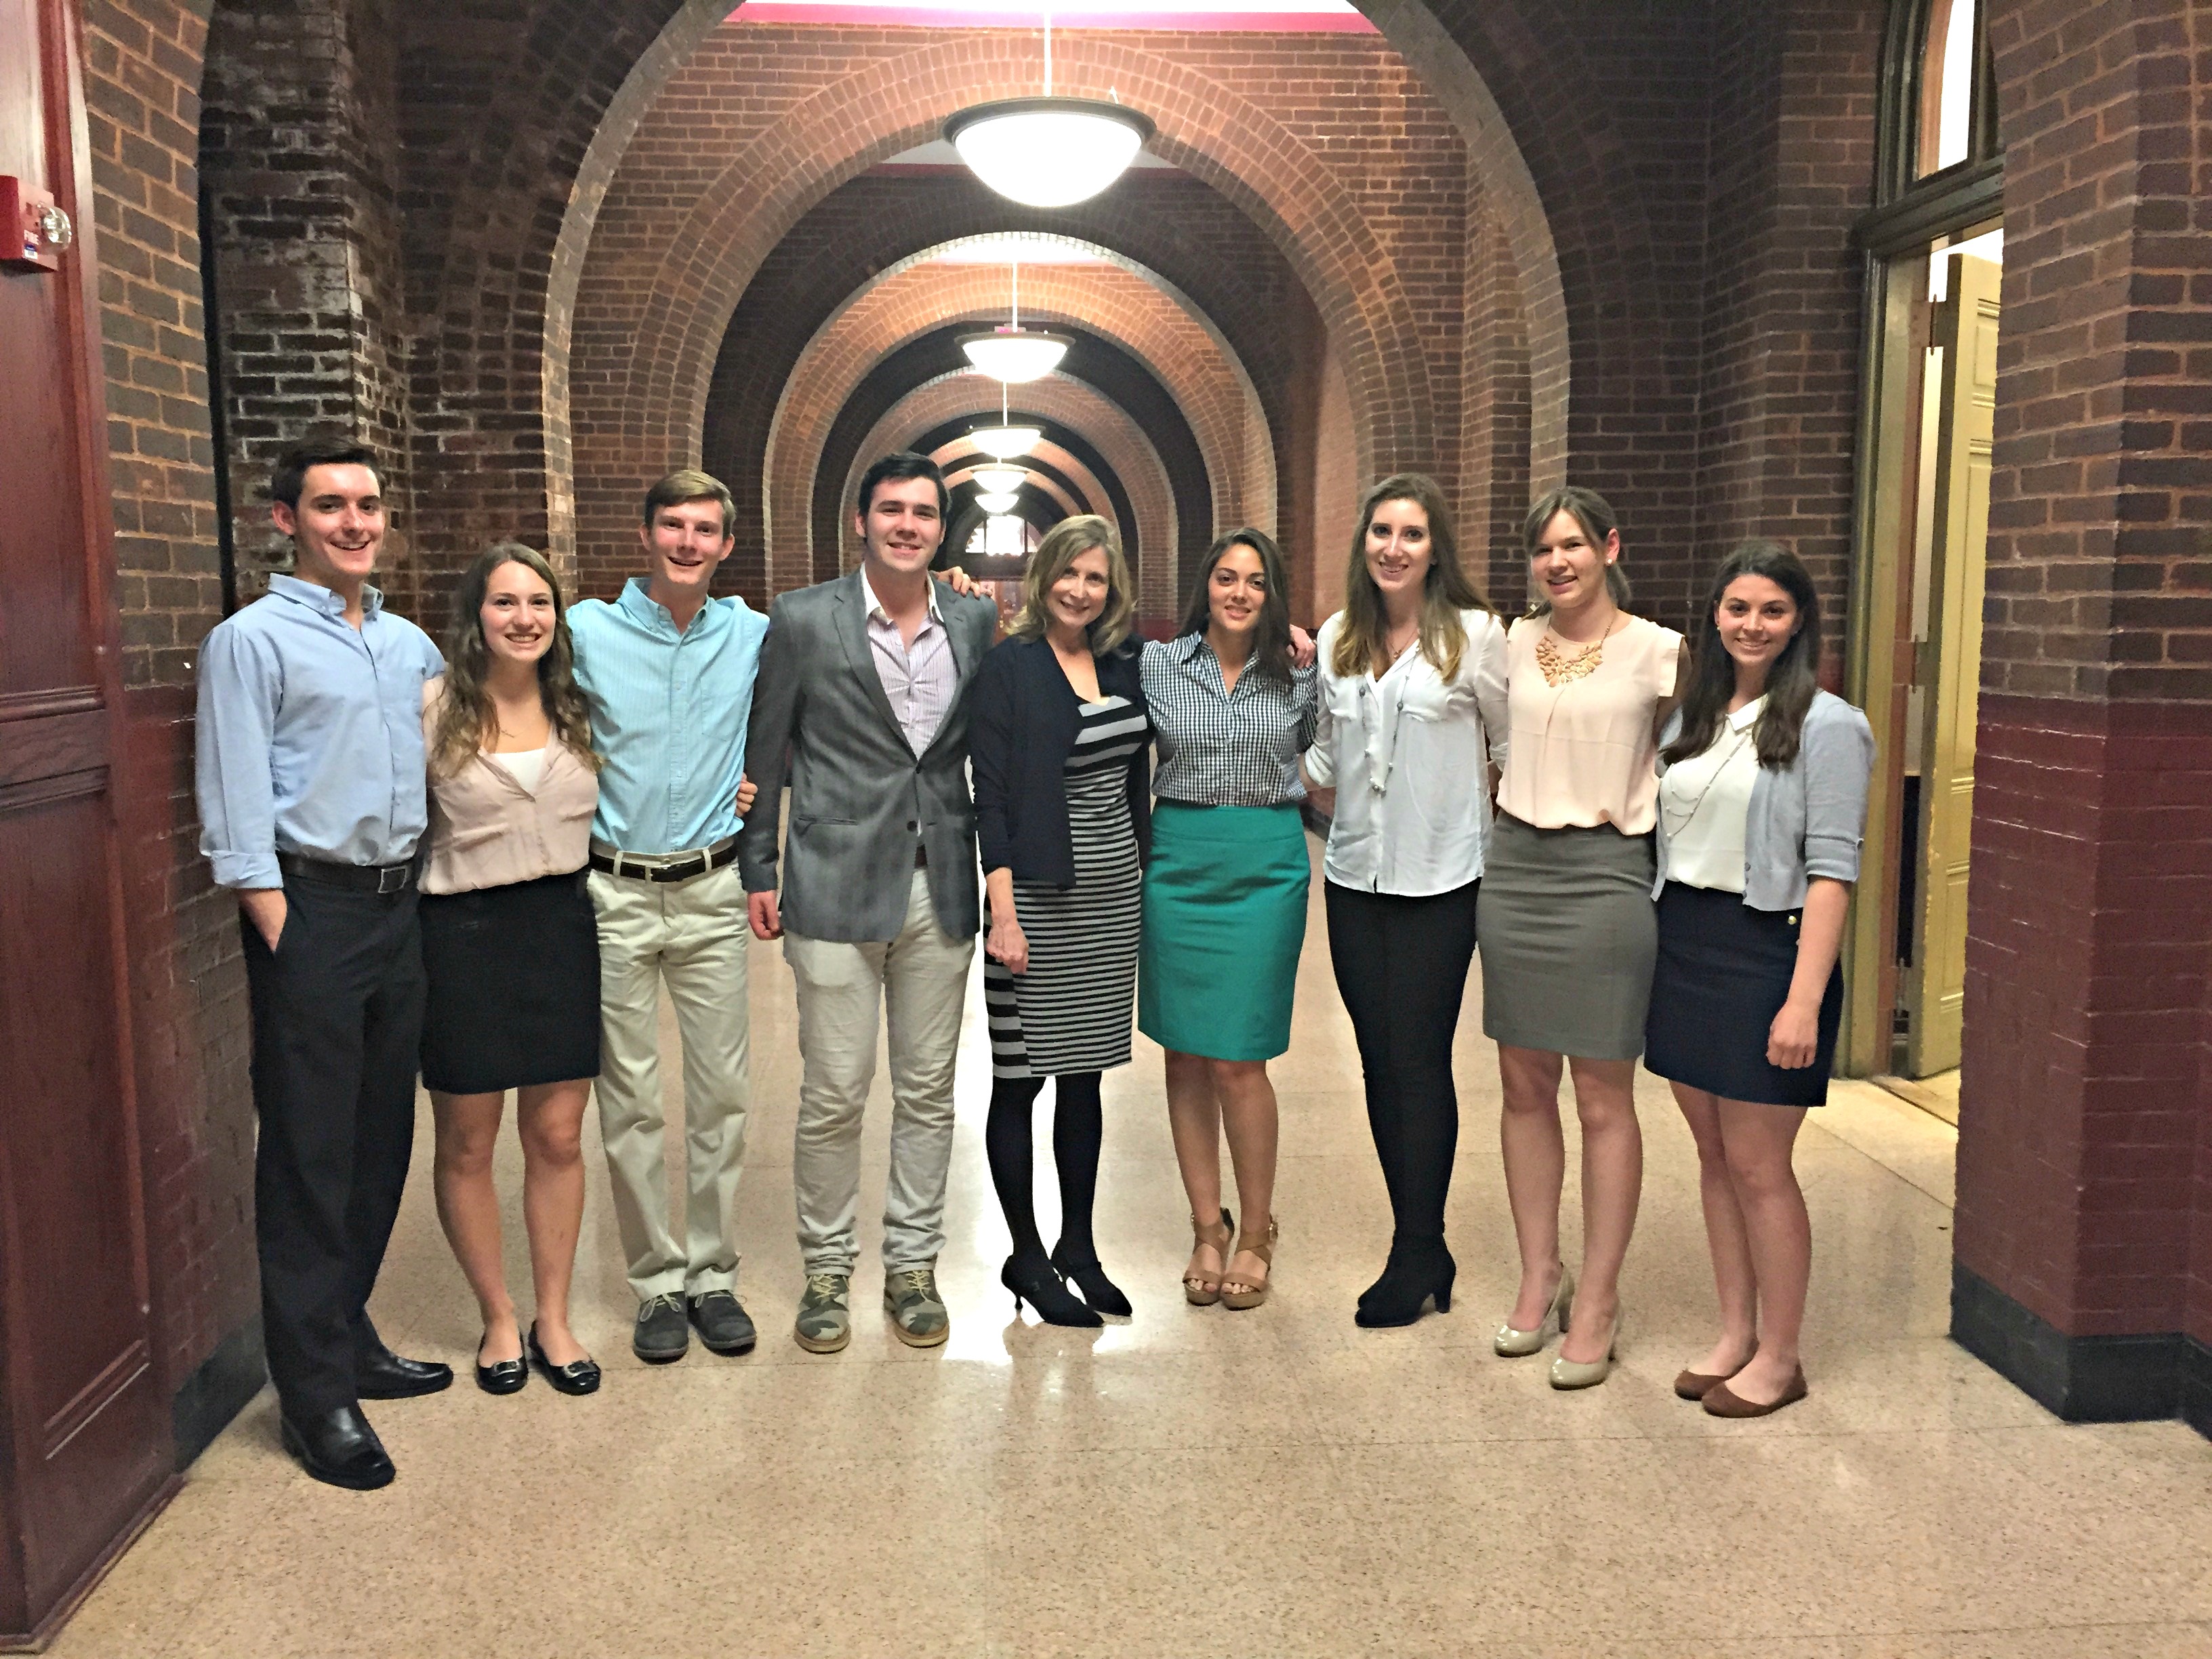 Georgetown CRs with Dr. Sommers after the controversial lecture. Image credit: Clare Boothe Luce Policy Institute